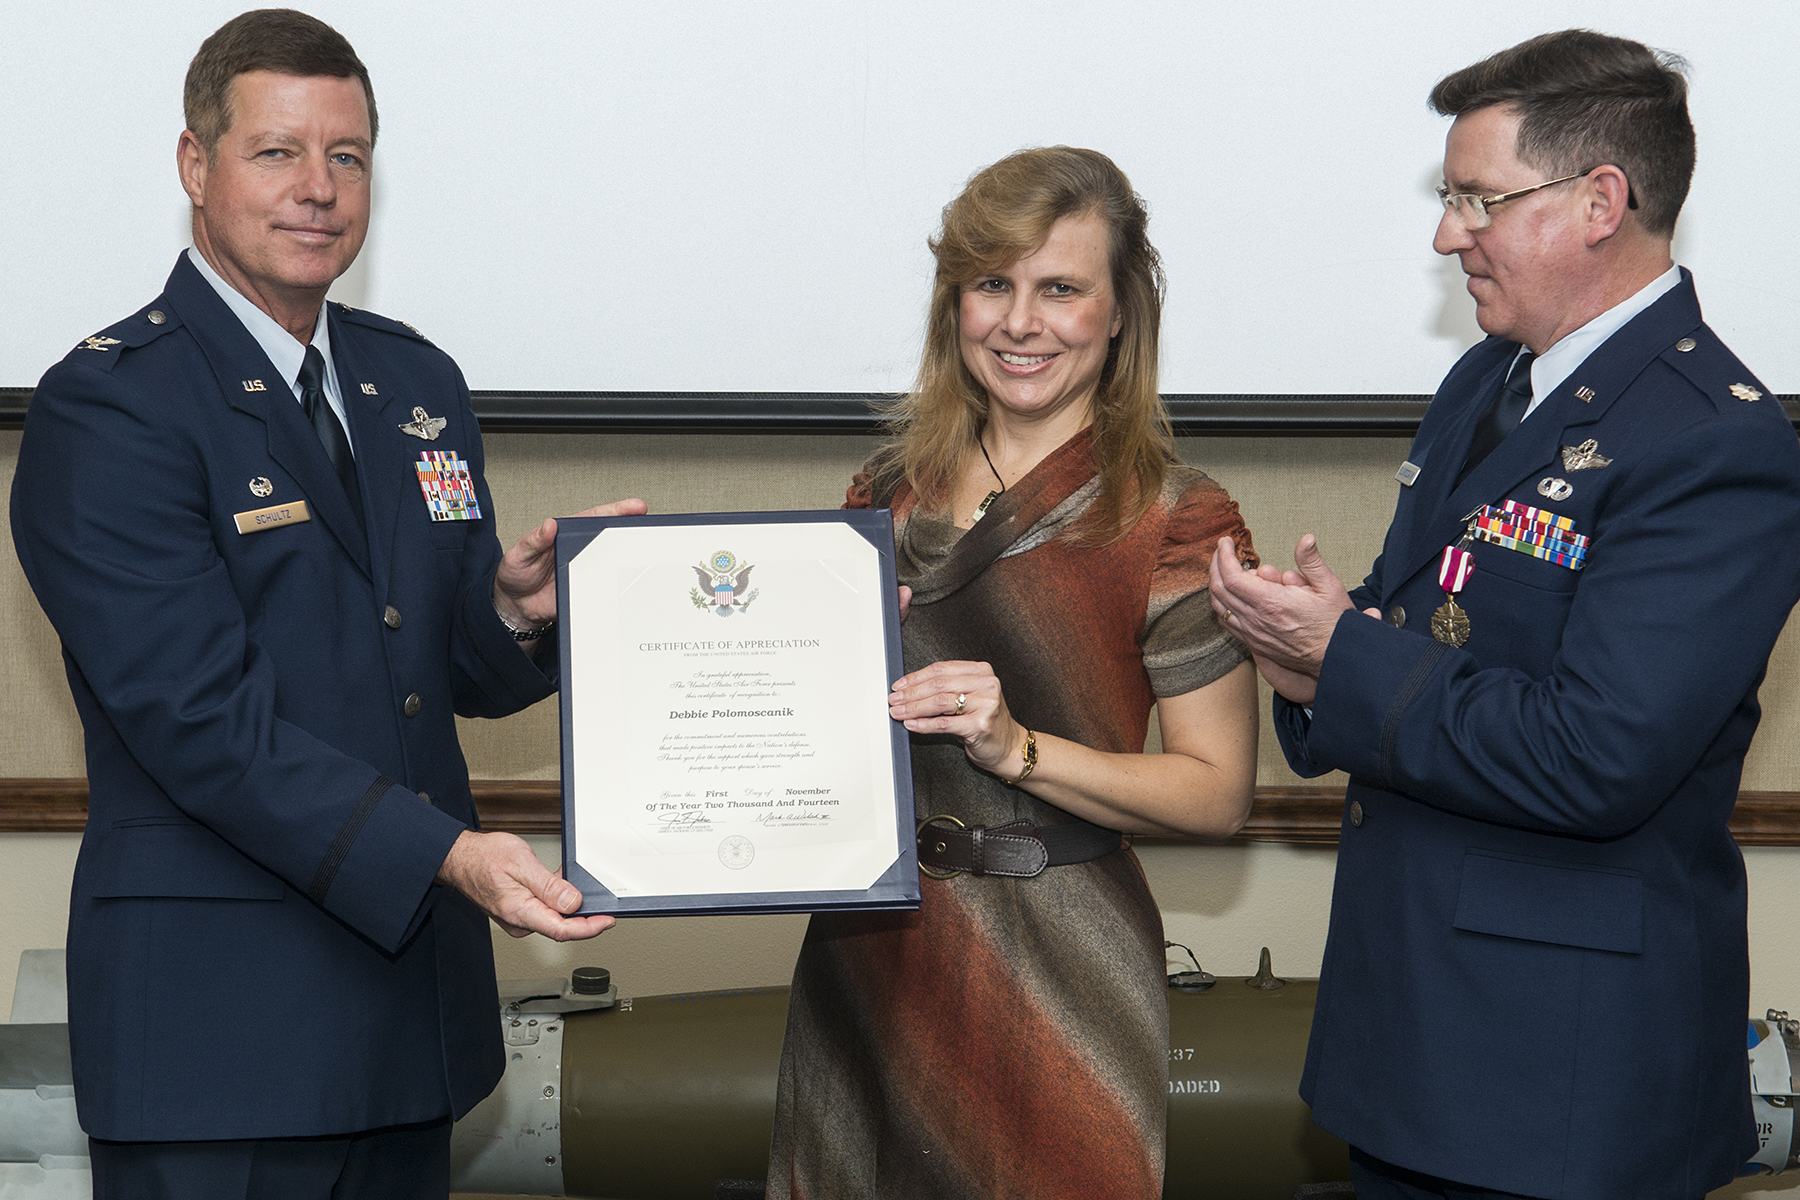 Air Force Spouse Letter Of Appreciation Certificate Of Appreciation For Service In The Armed Other Photos Of People In Uniform Should Have Their Face Tekan